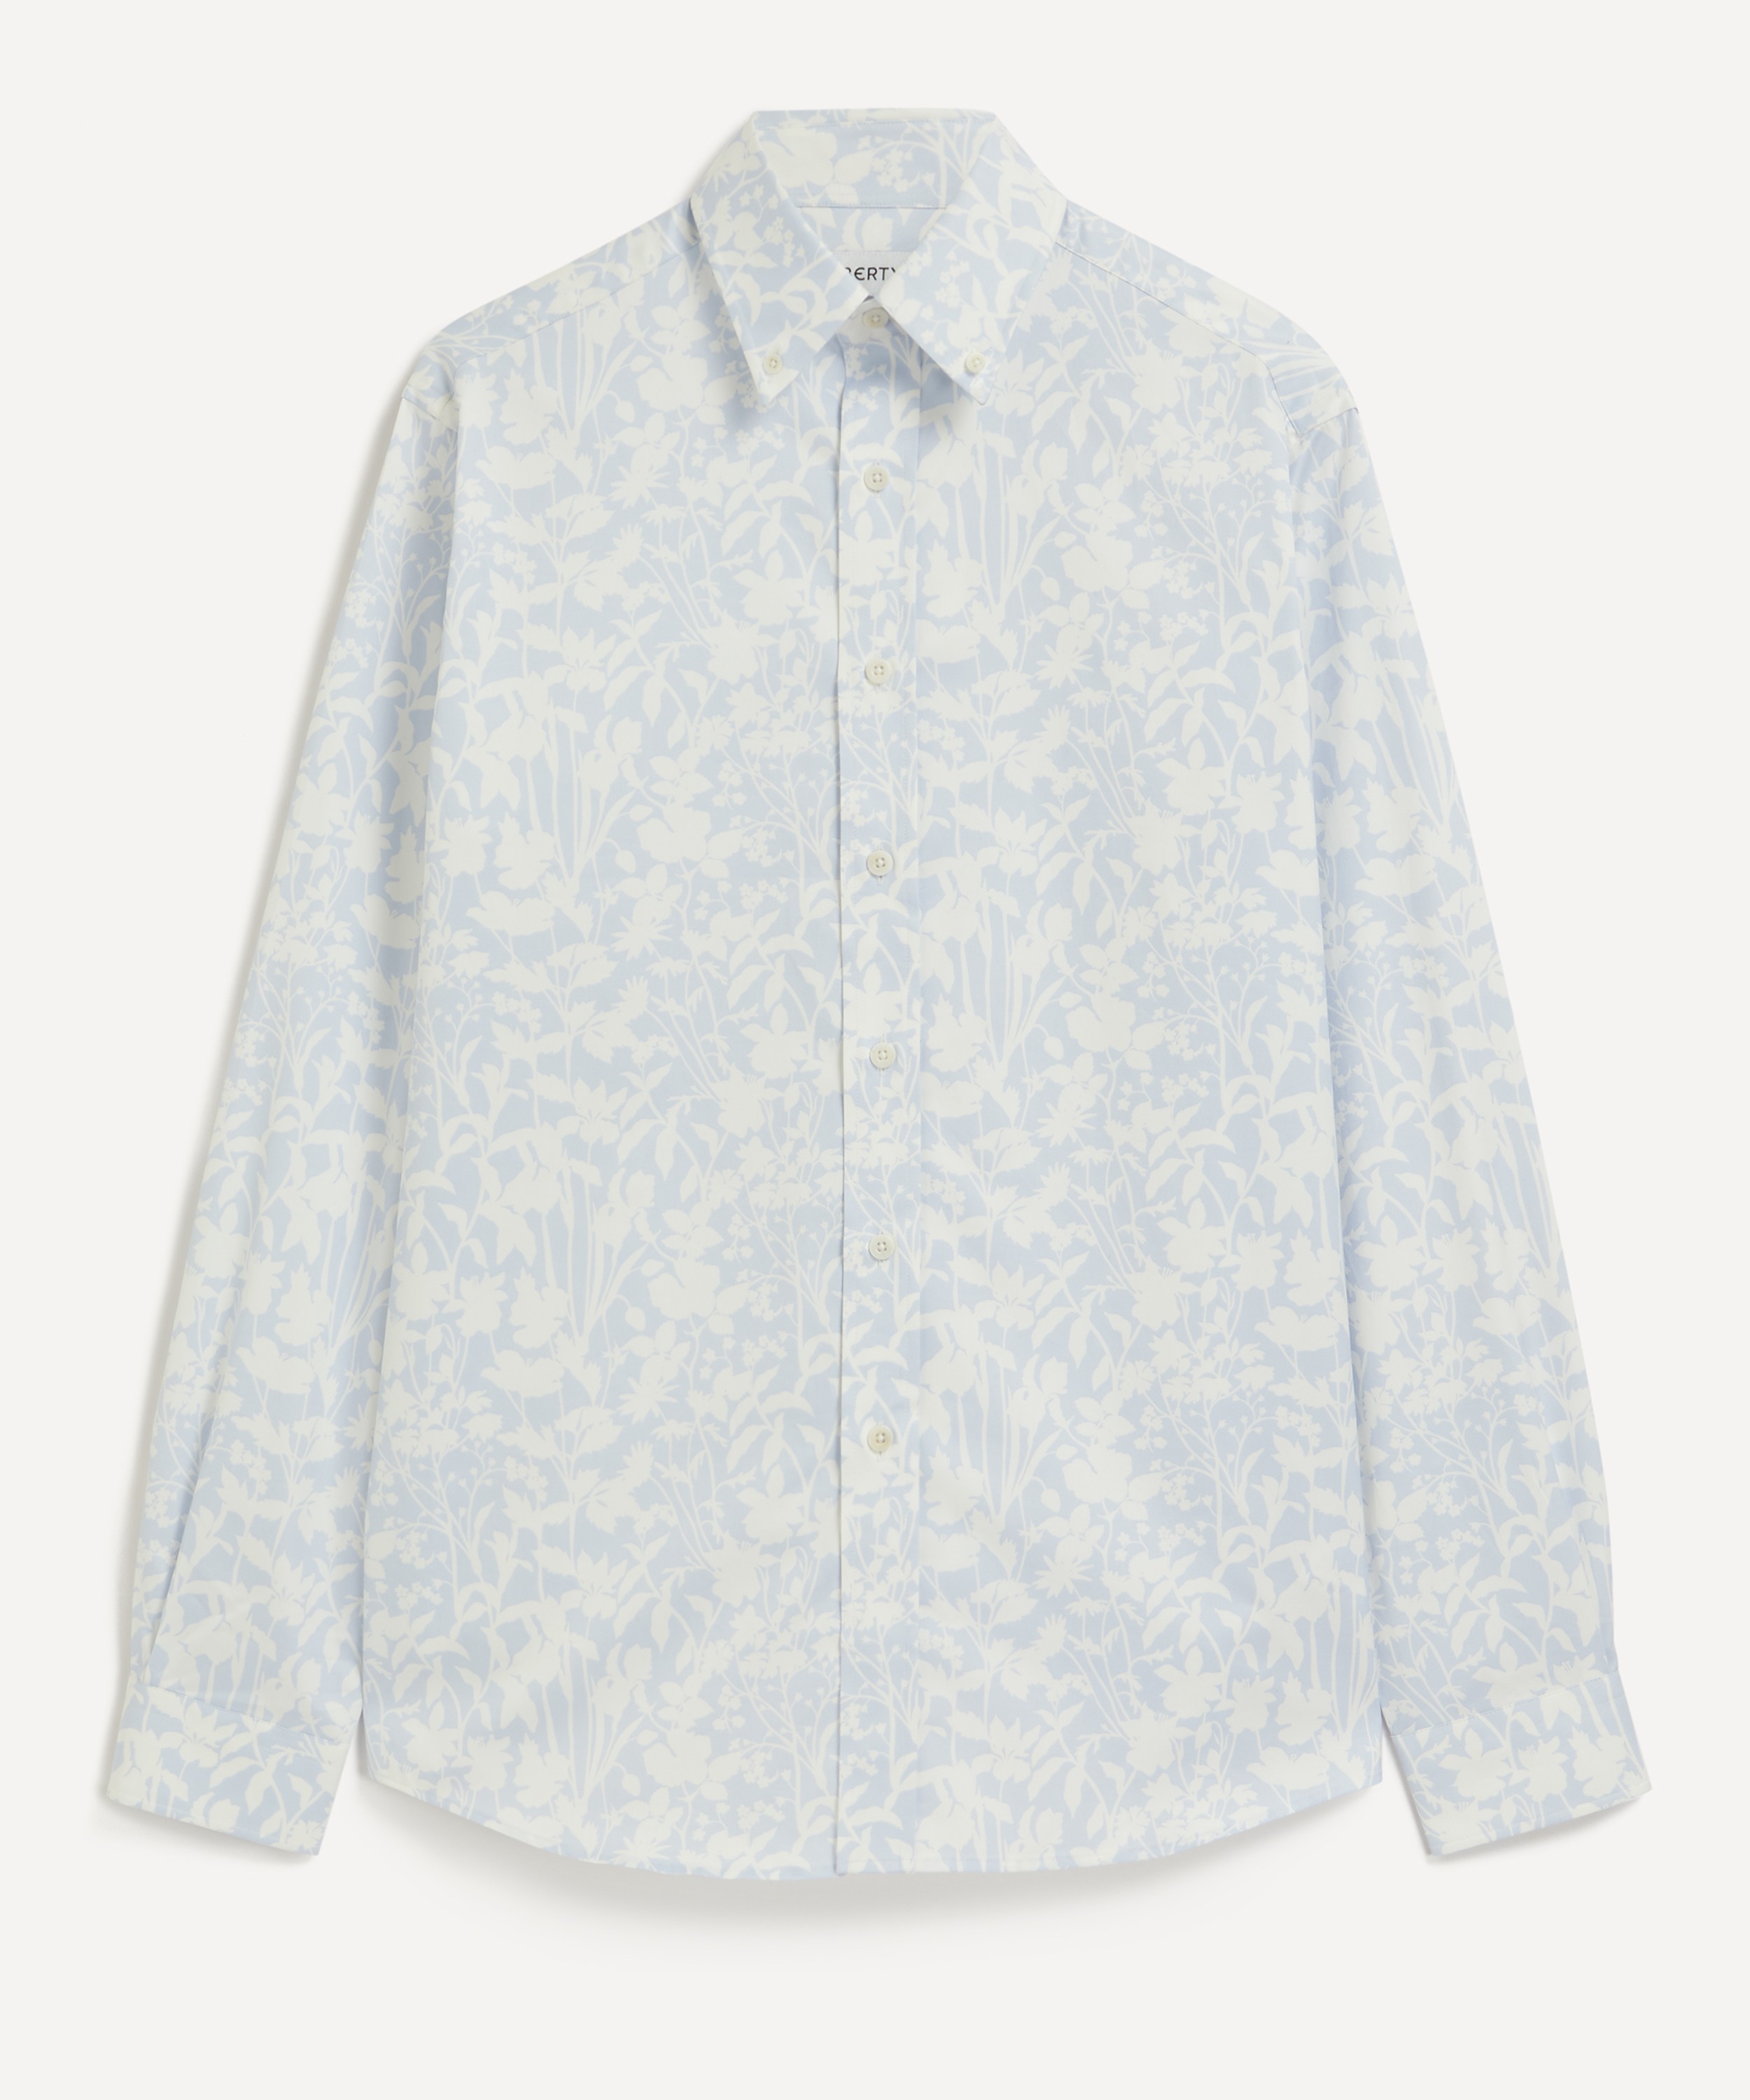 Liberty - Alex Stowe Cotton Twill Shirt in Ophelia’s Silhouette  image number 0